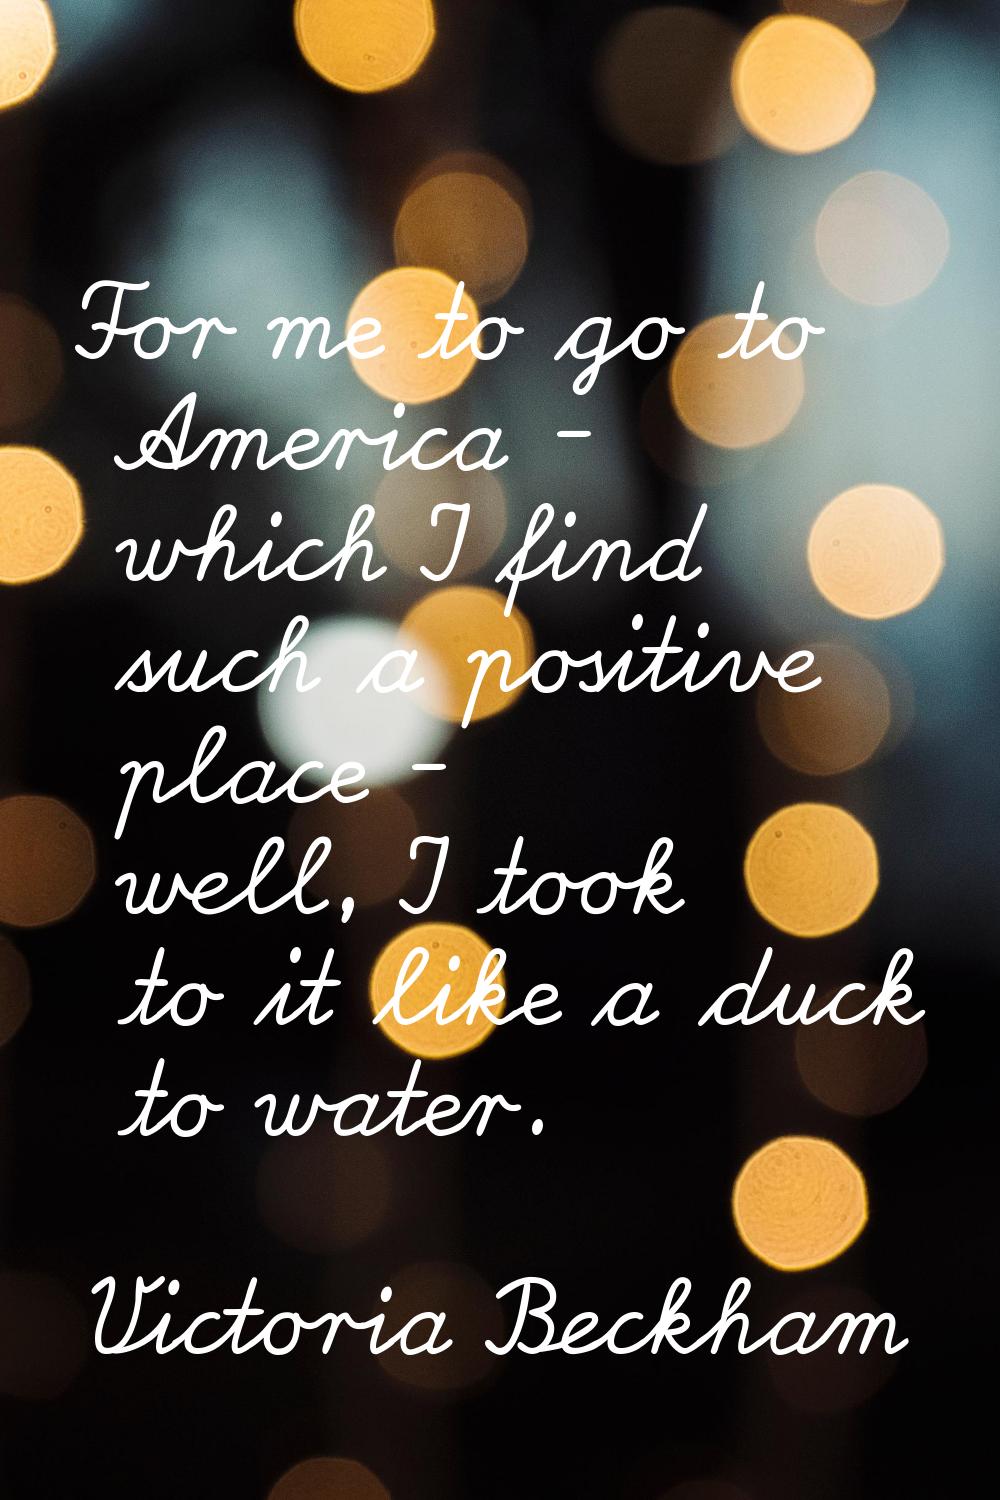 For me to go to America - which I find such a positive place - well, I took to it like a duck to wa